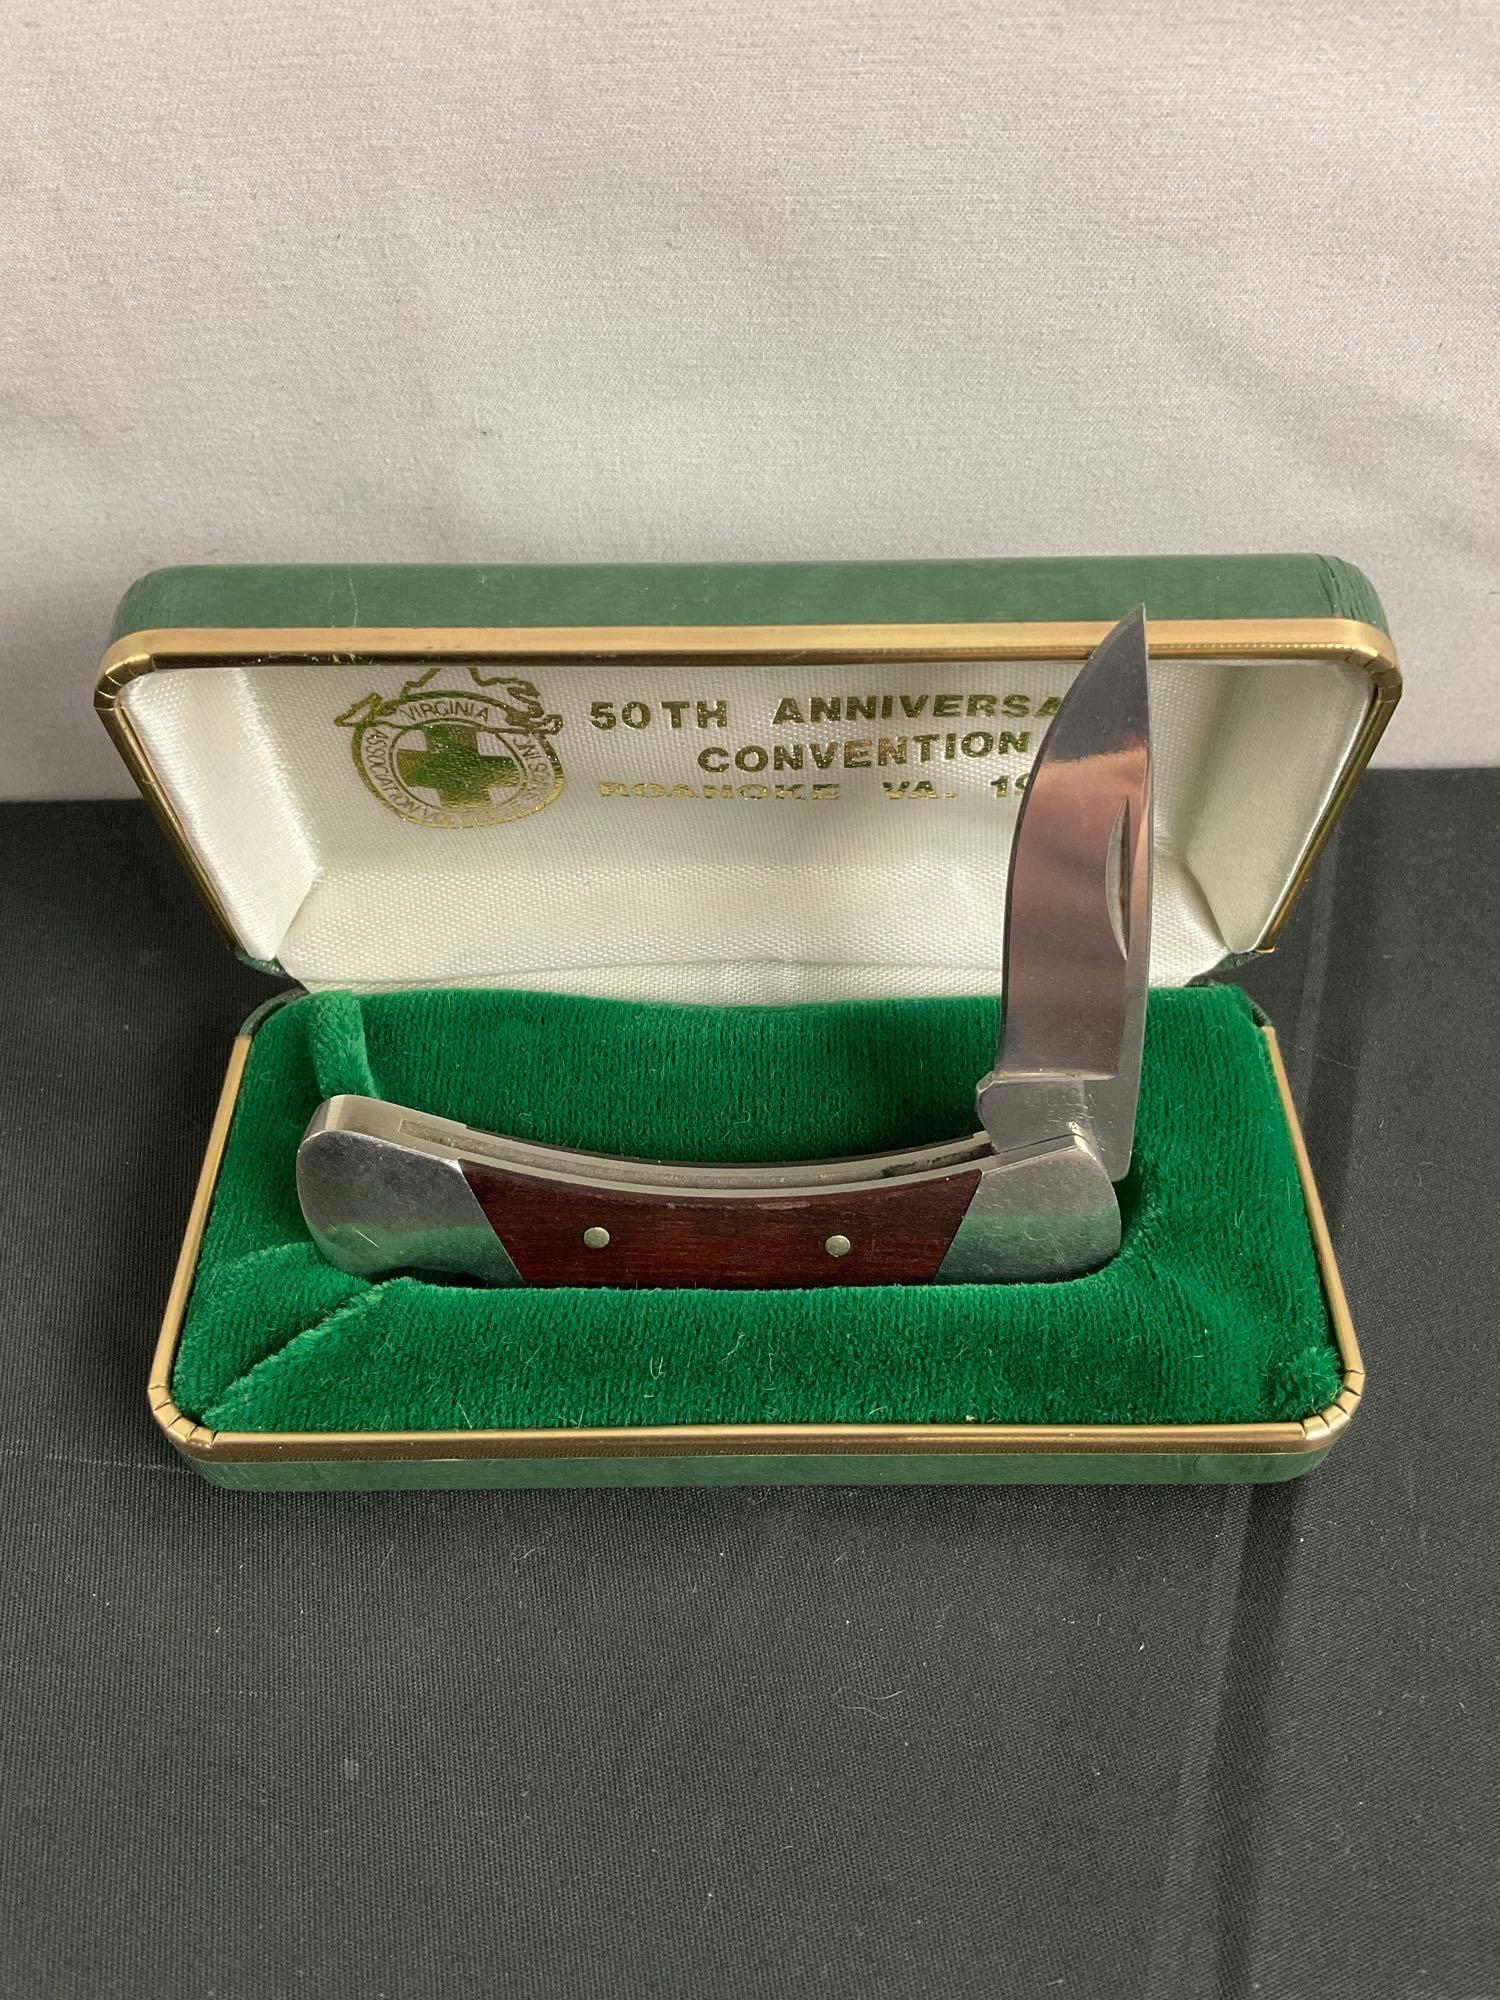 Buck Folding Pocket Knives - 50th Anniversary Convention Knives - Numbered 525C & 505C